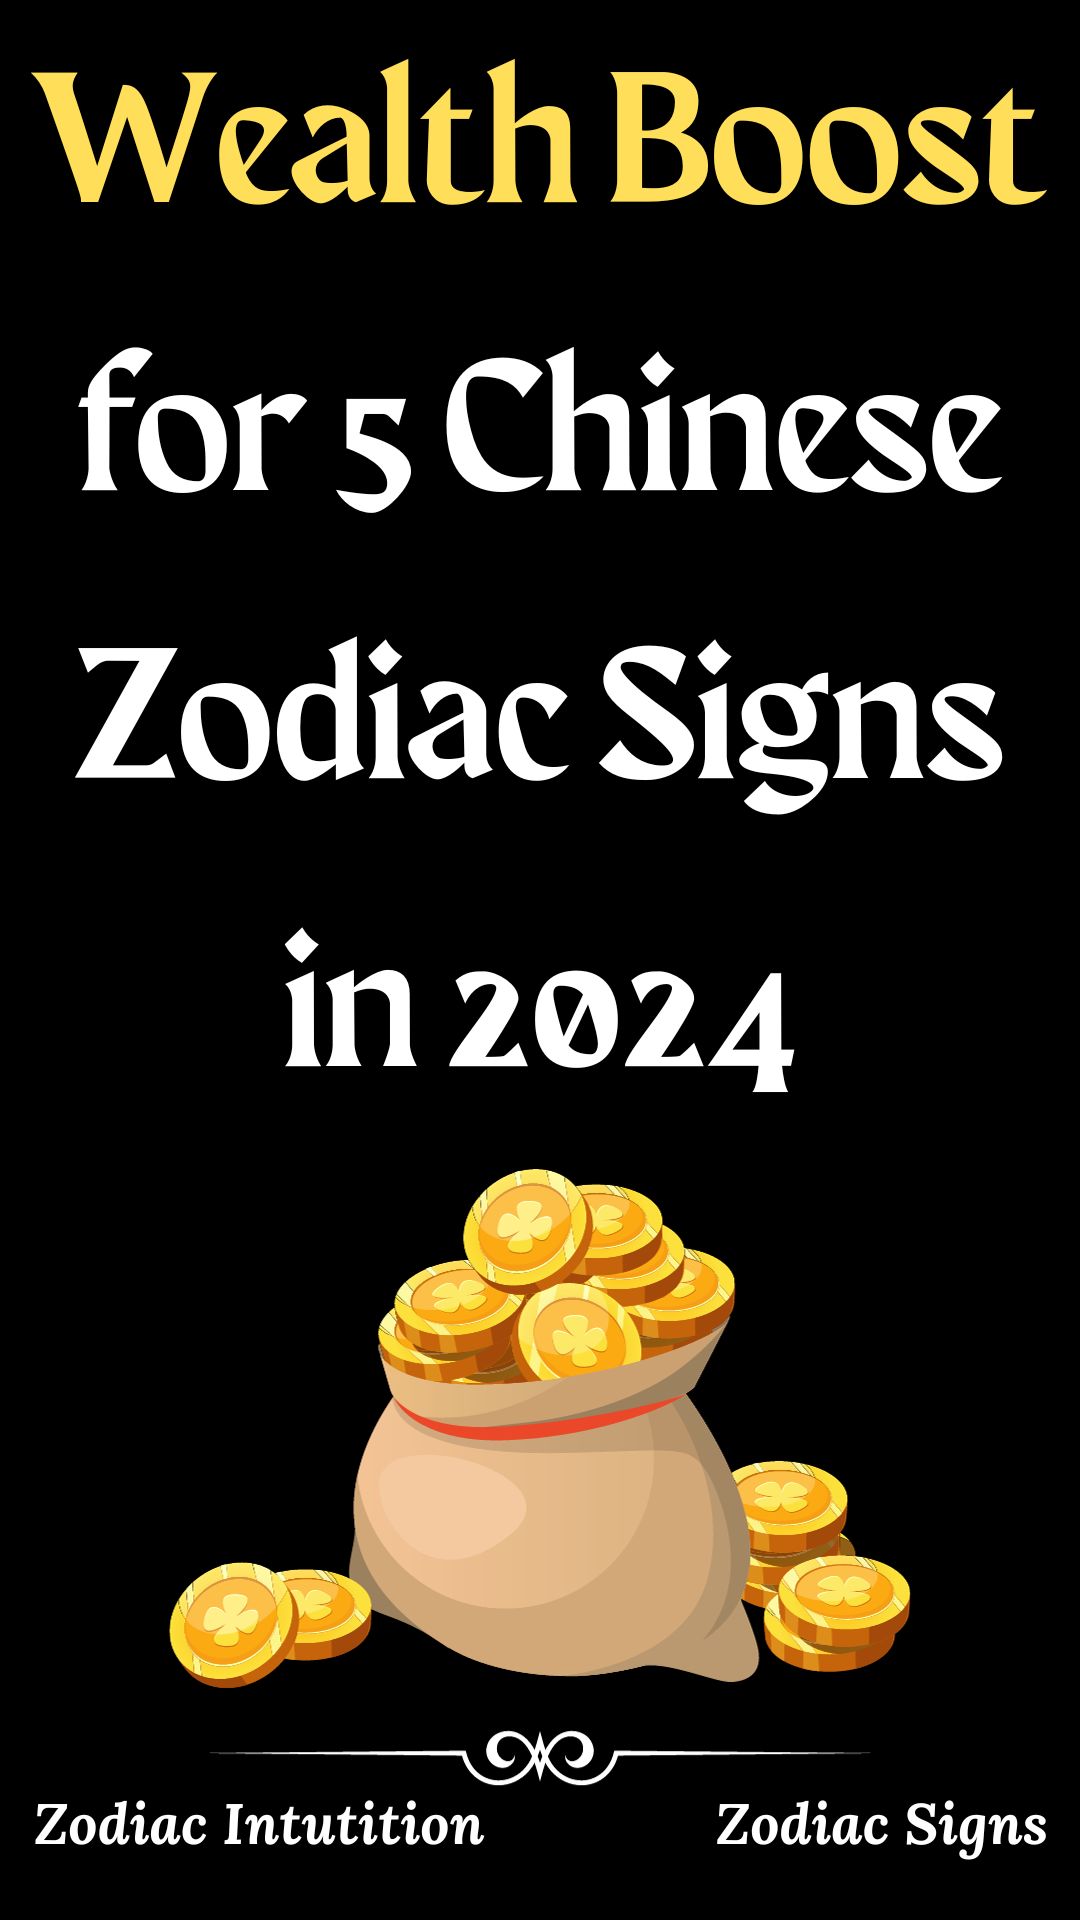 Wealth Boost for 5 Chinese Zodiac Signs in 2024